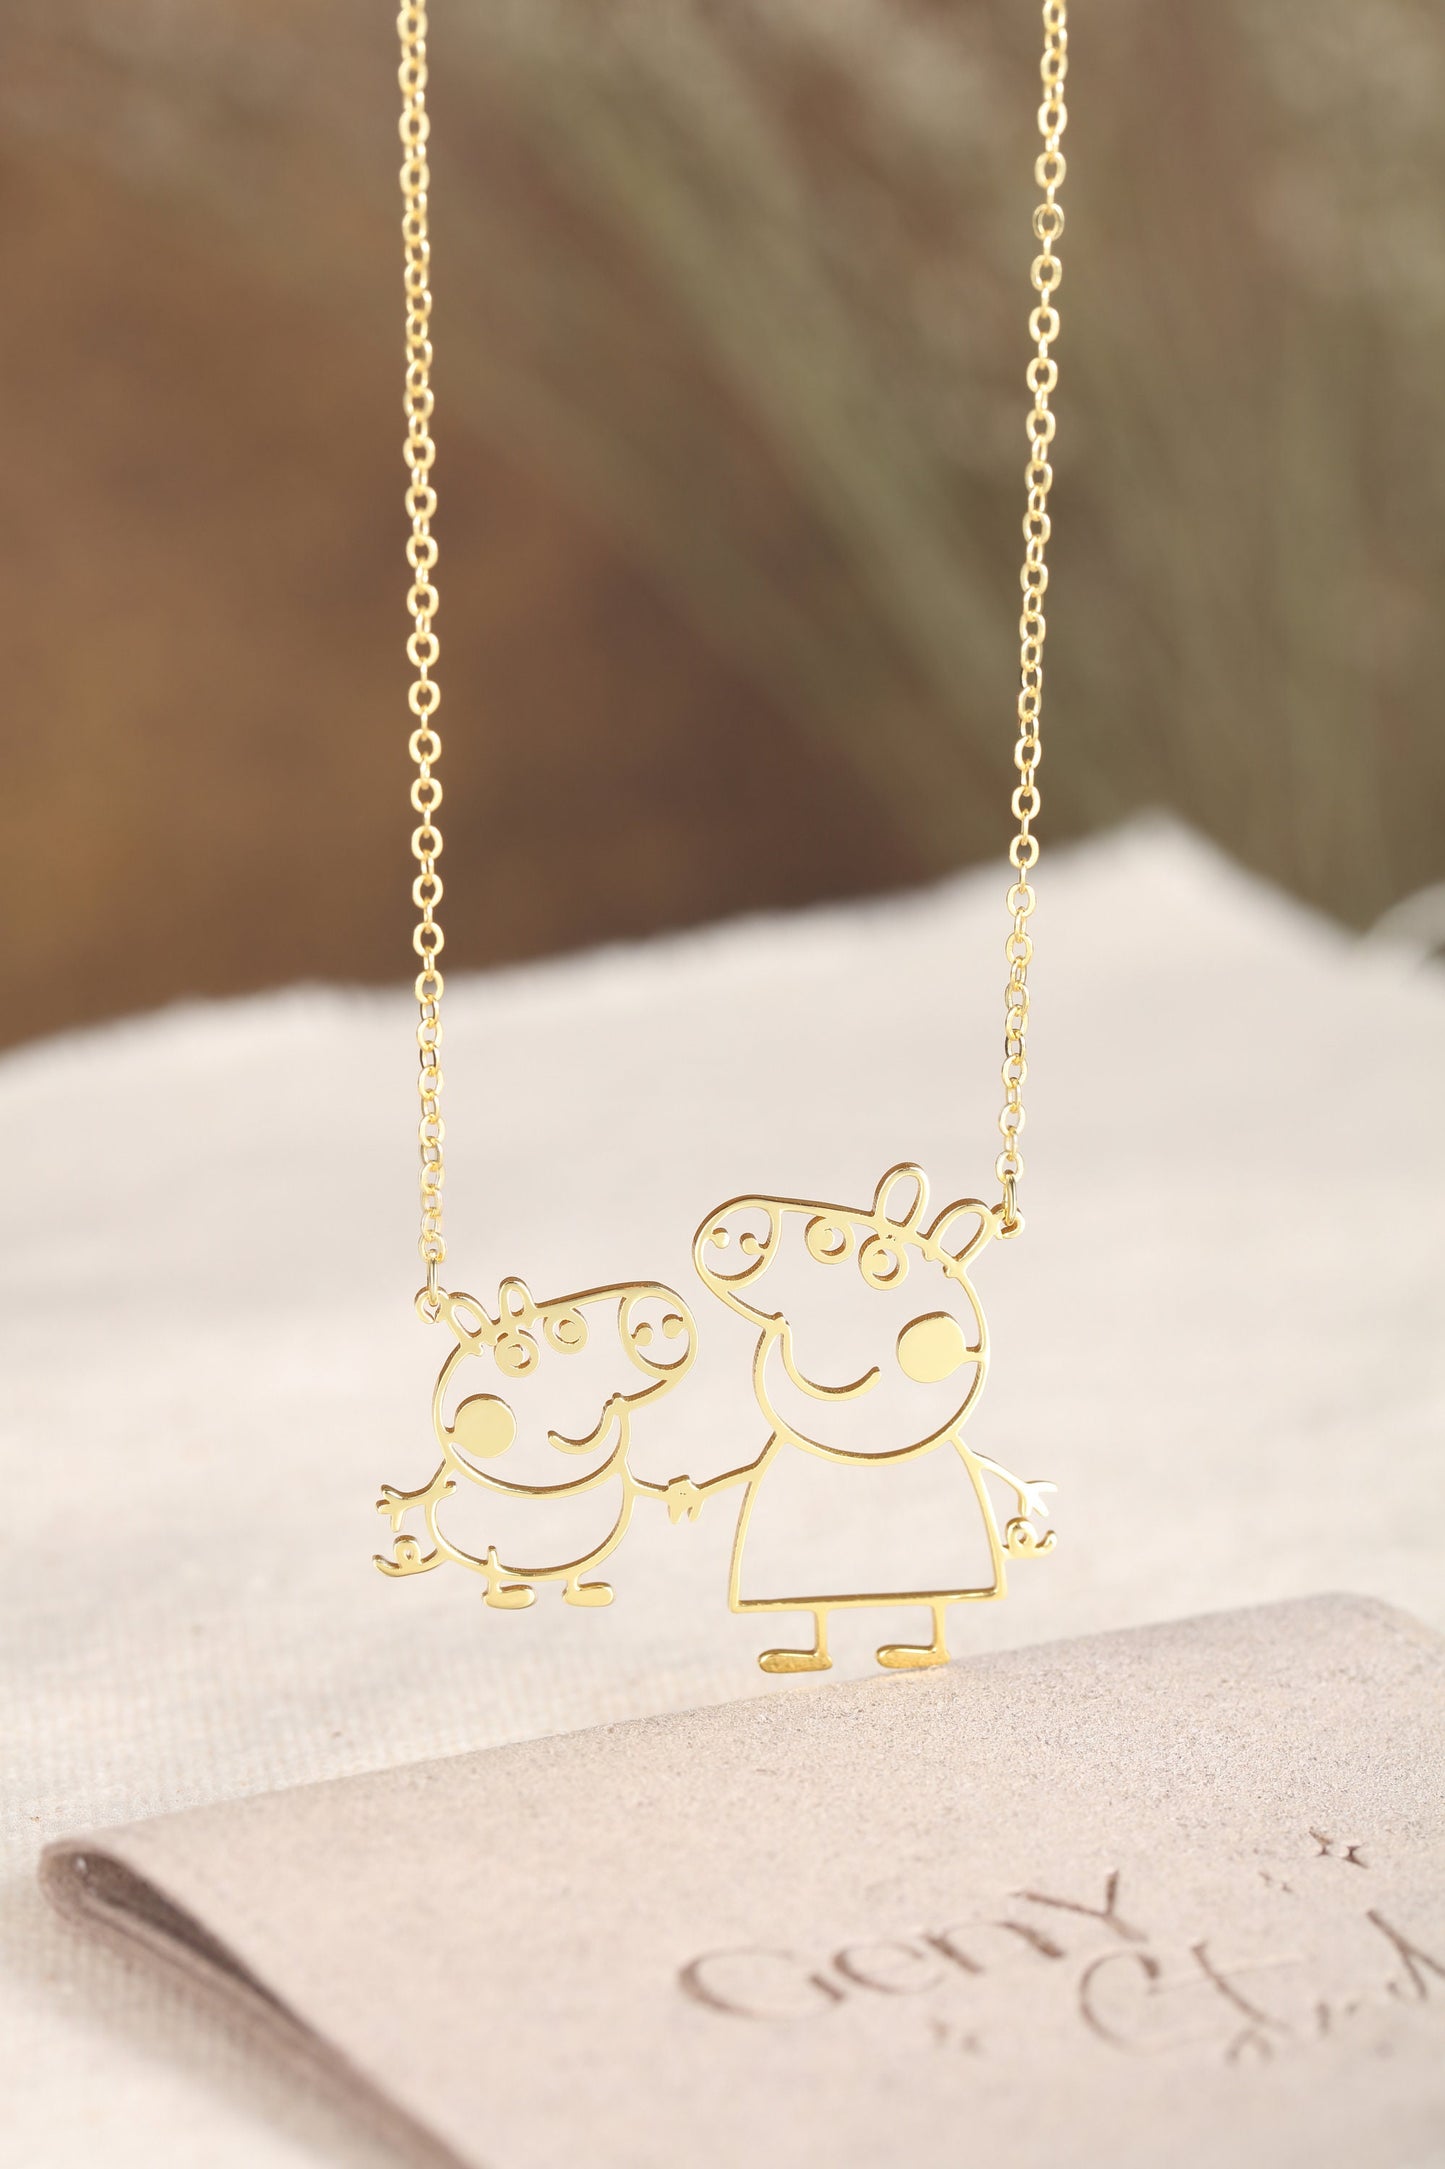 Children's Drawing Necklace in 18K Gold: Cherished Memories in Jewelry